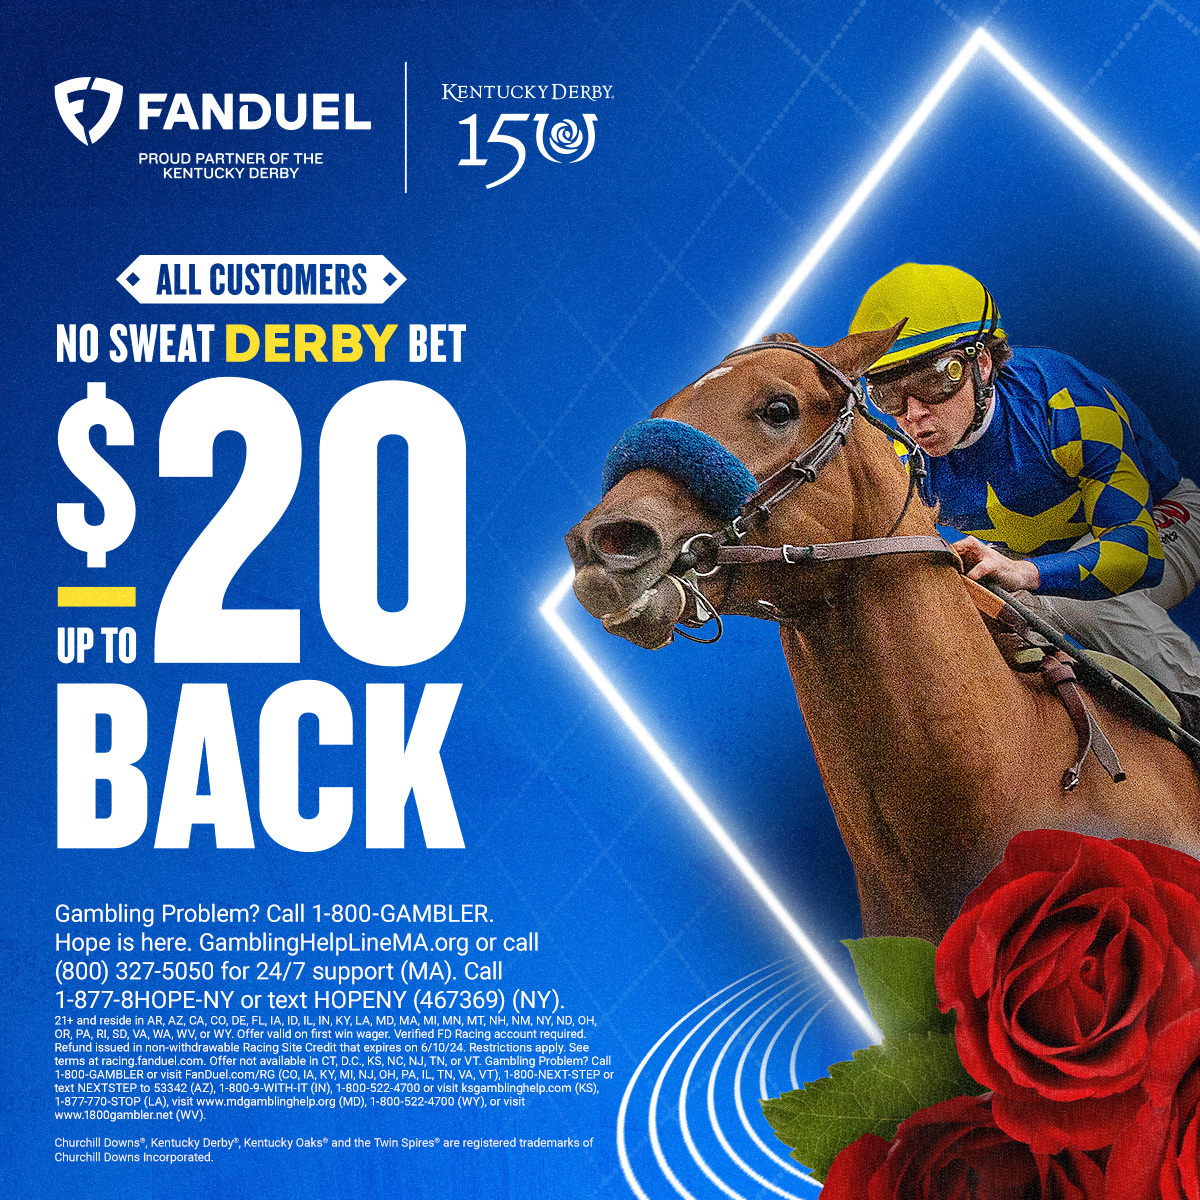 Bet the Kentucky Derby with FanDuel! 🐎 Place a single horse win wager on the Kentucky Derby and get up to $20 back as a racing bonus if you don't win! ➡️ bit.ly/FD-KYDerby150 | @FanDuel_Racing